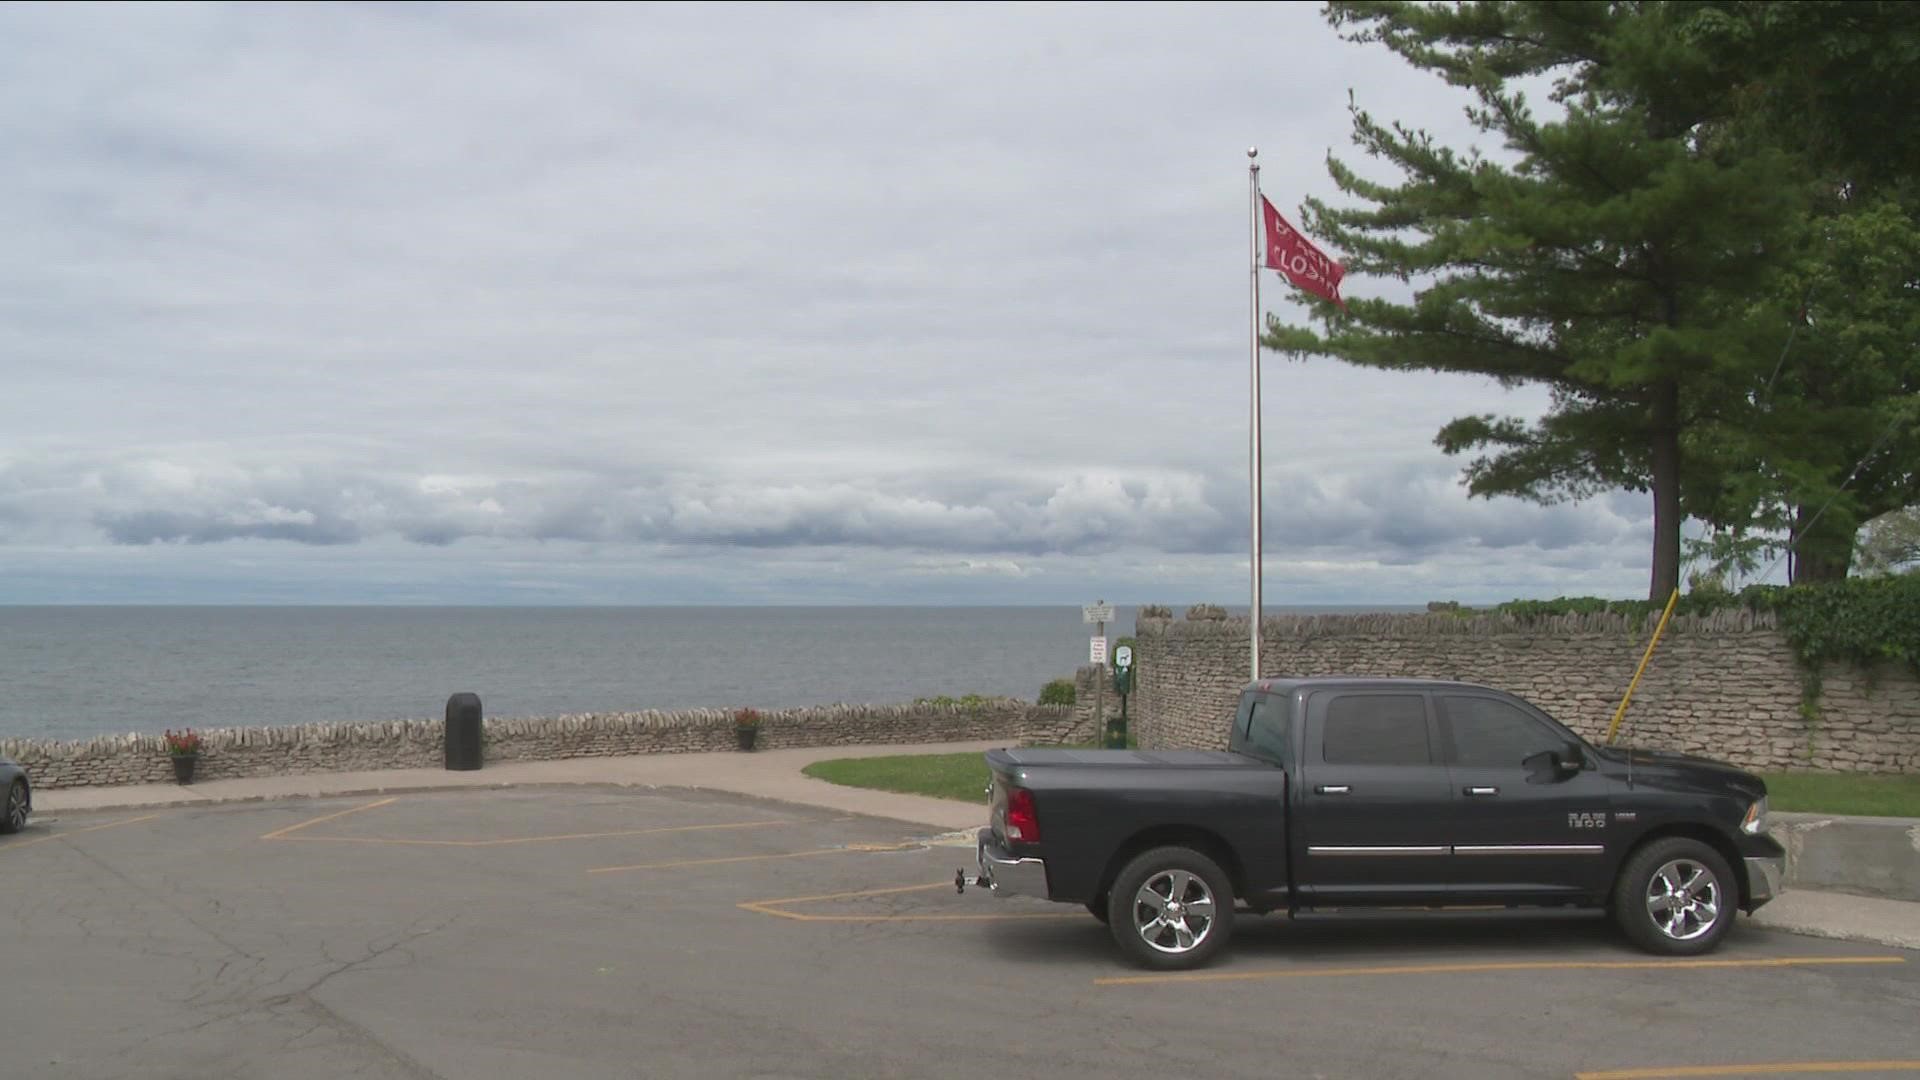 This week's water quality sampling results for Olcott Beach on Lake Ontario came back today and it was not good news.